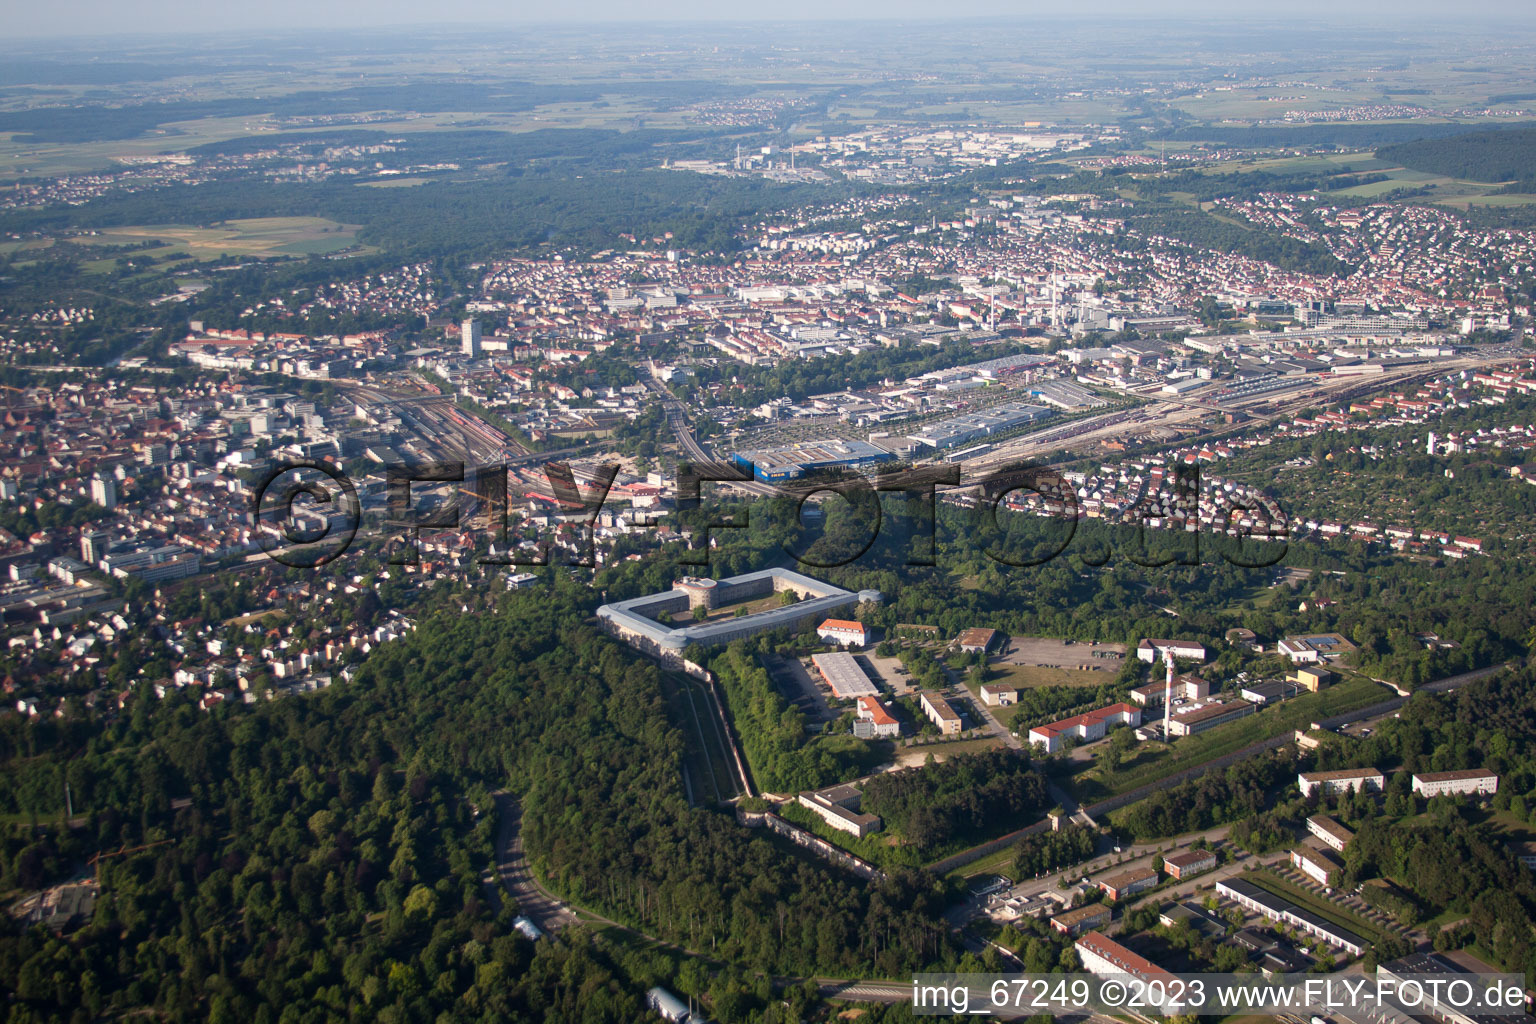 Aerial view of Ulm in the state Baden-Wuerttemberg, Germany